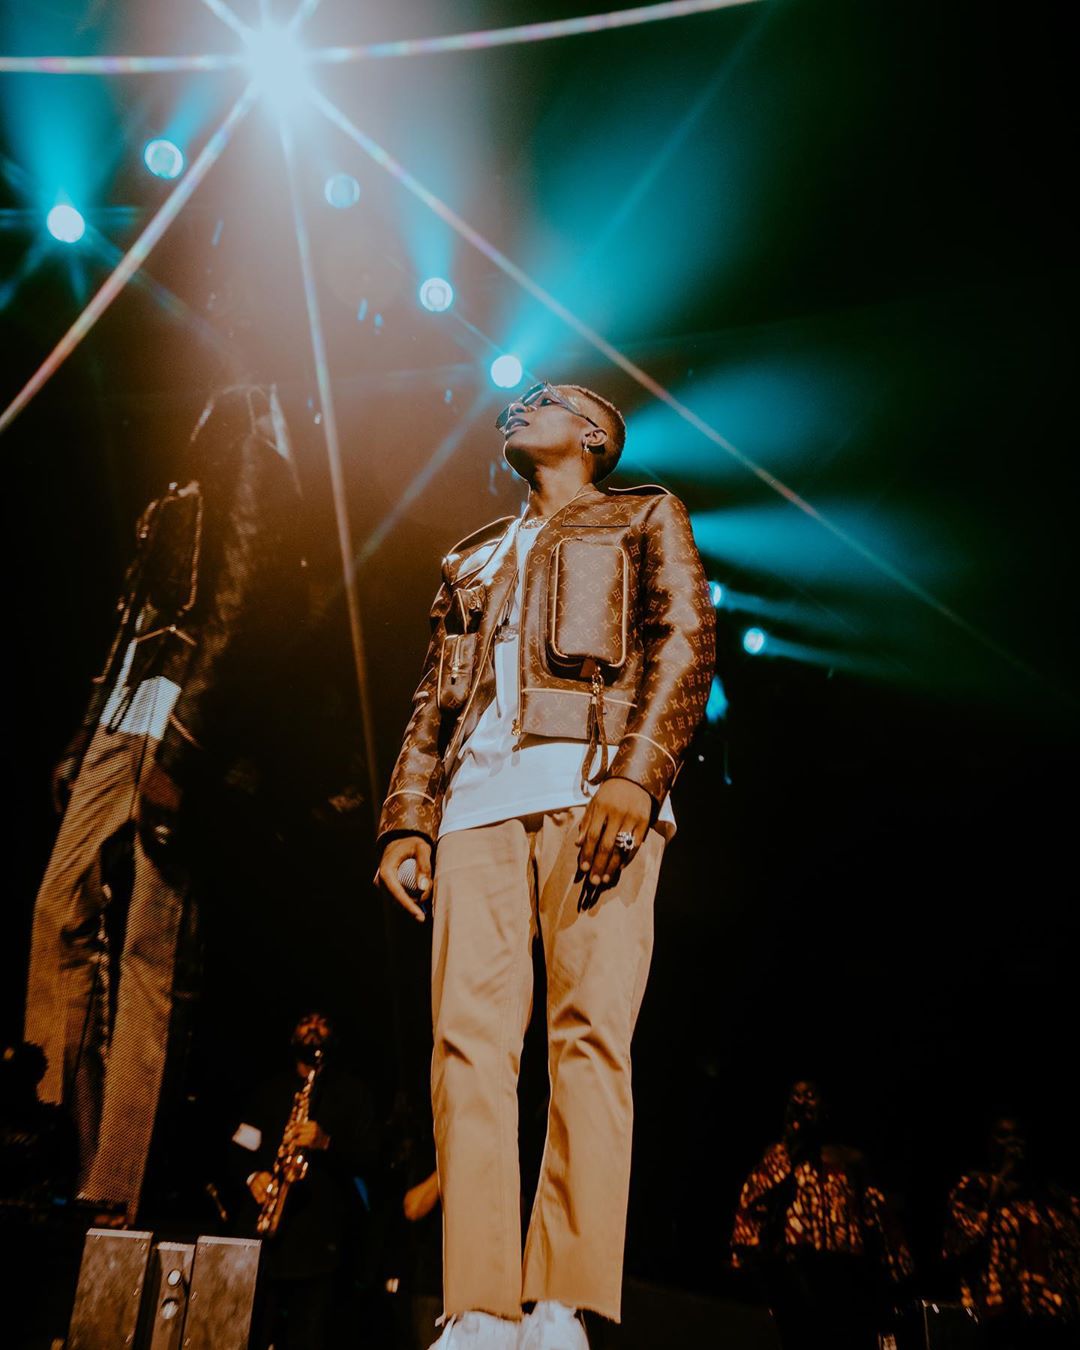 We sell everything a man wears - Louis Vuitton Jacket as seen on Wizkid  Available🔥 Price: 23k Available in Size: Medium-XXL ______ ORDER VIA  Whatsapp📲: 07067045949 Send a DM to @dolce.vita.nigeria ______